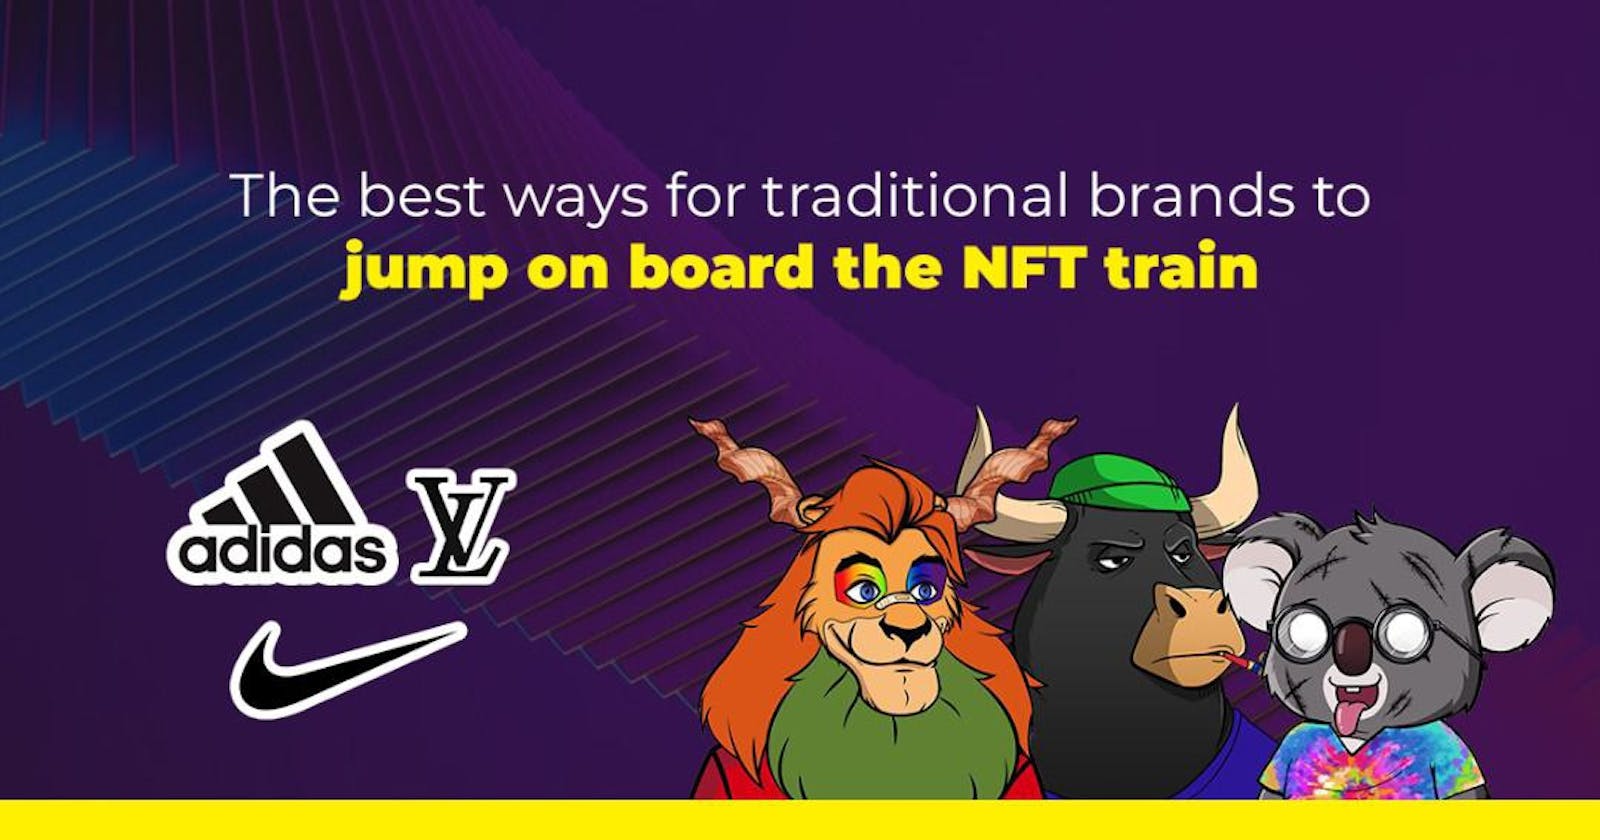 The best ways for traditional brands to jump on board the NFT train